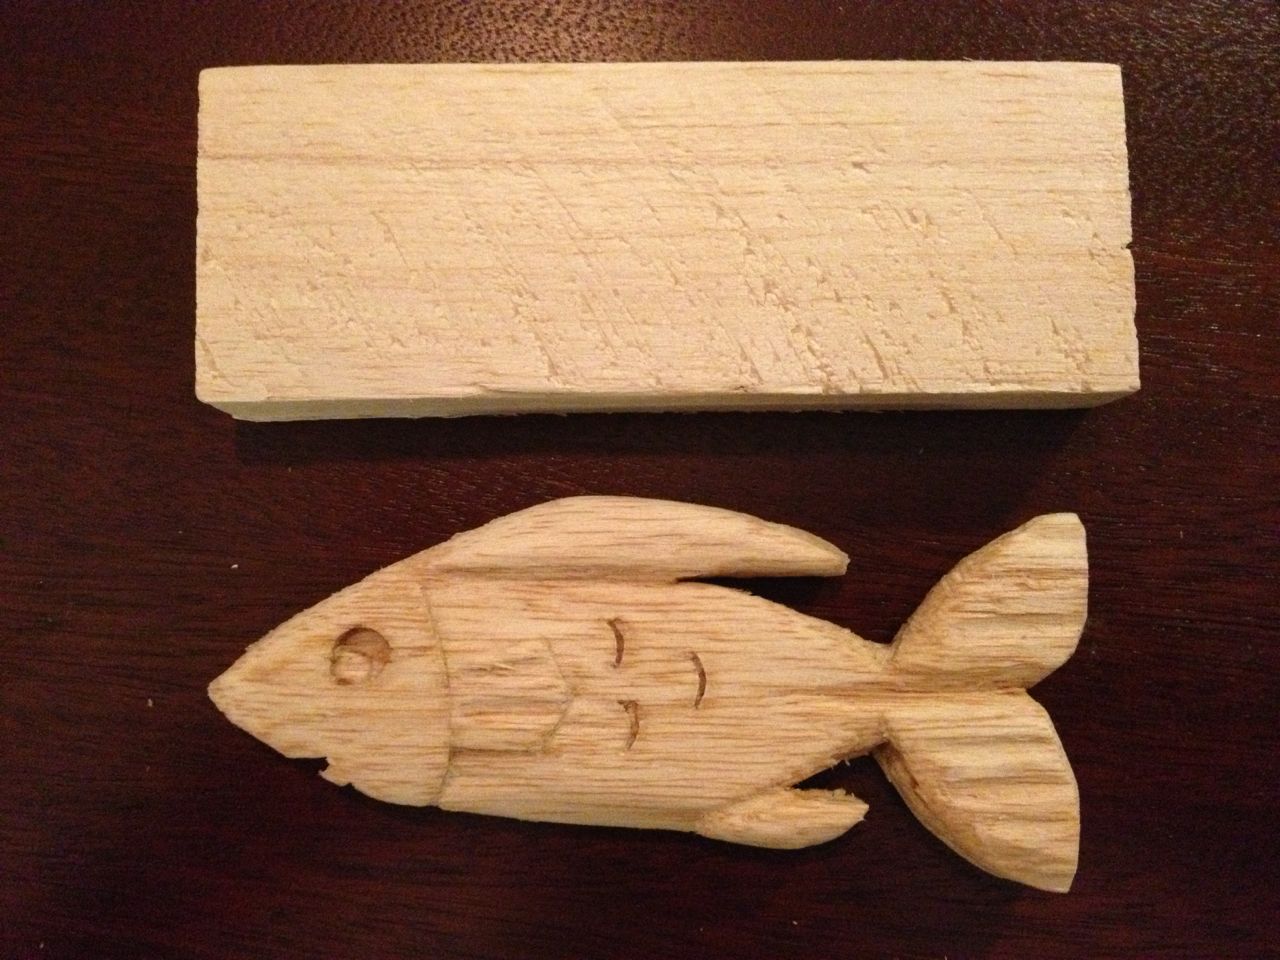 Wood Carving Projects for Kids